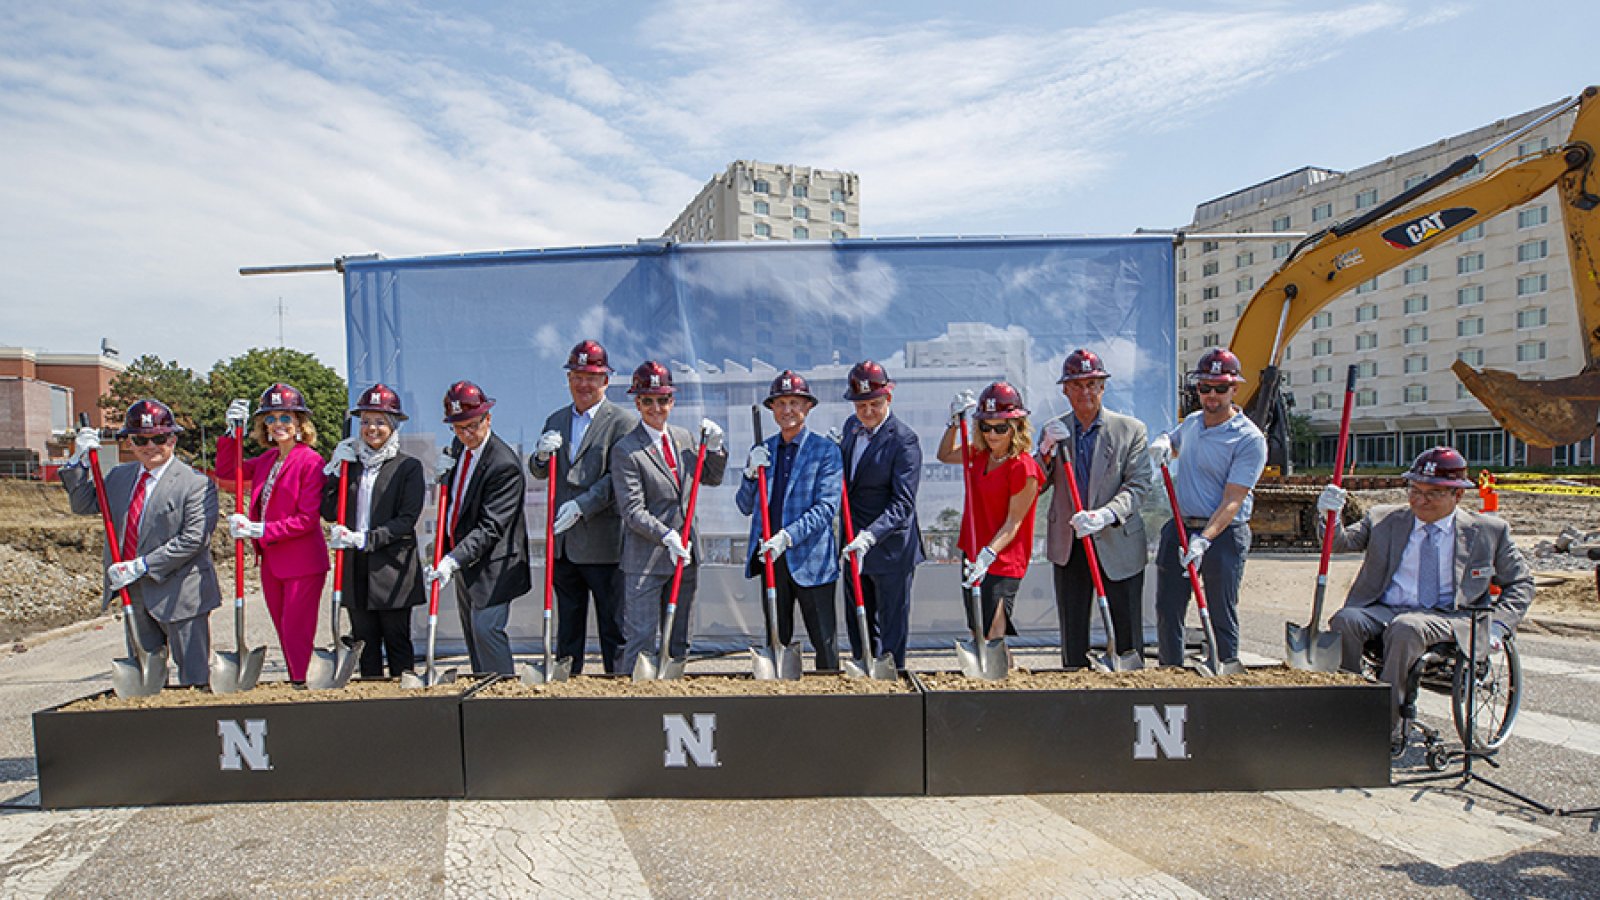 On June 28, 2021, the College of Engineering held a groundbreaking ceremony to celebrate the beginning of construction on Kiewit Hall.